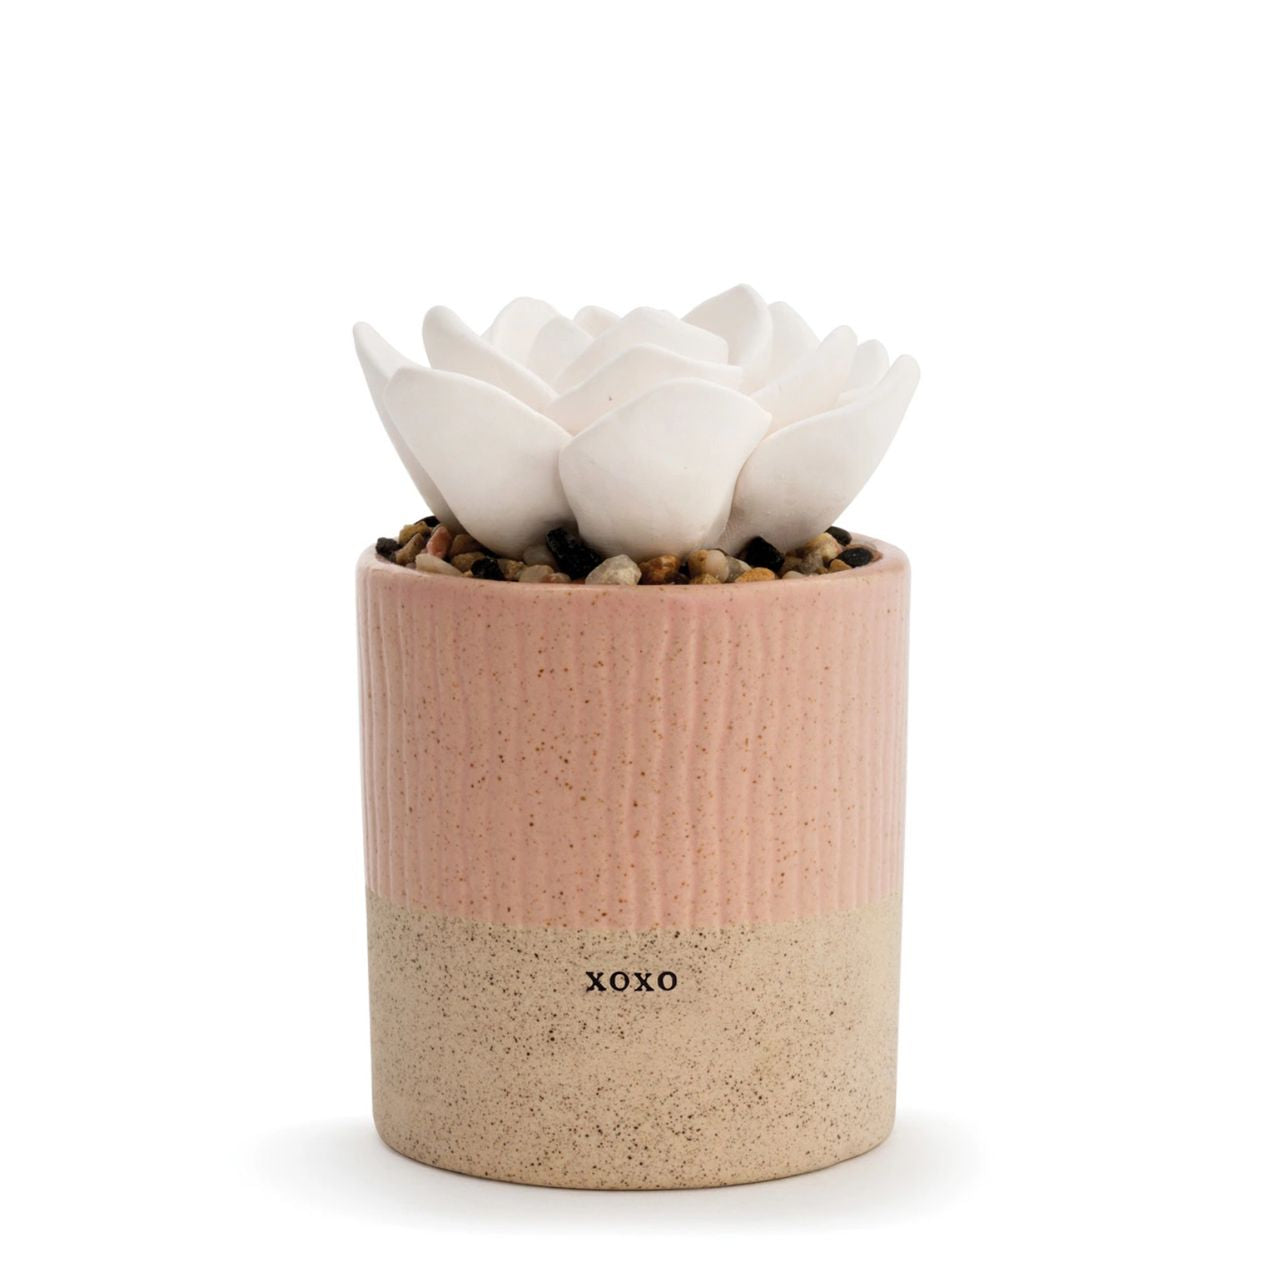 Succulent Oil Diffuser - XOXO by Demdaco  Enjoy a moment of peace with the Succulent Oil Diffuser - XOXO from the Quiet Moments collection. A natural way to refresh your space and soul. Give the ability to create quiet, peaceful moments whenever needed with hand-sculpted, artisan aromatherapy. 